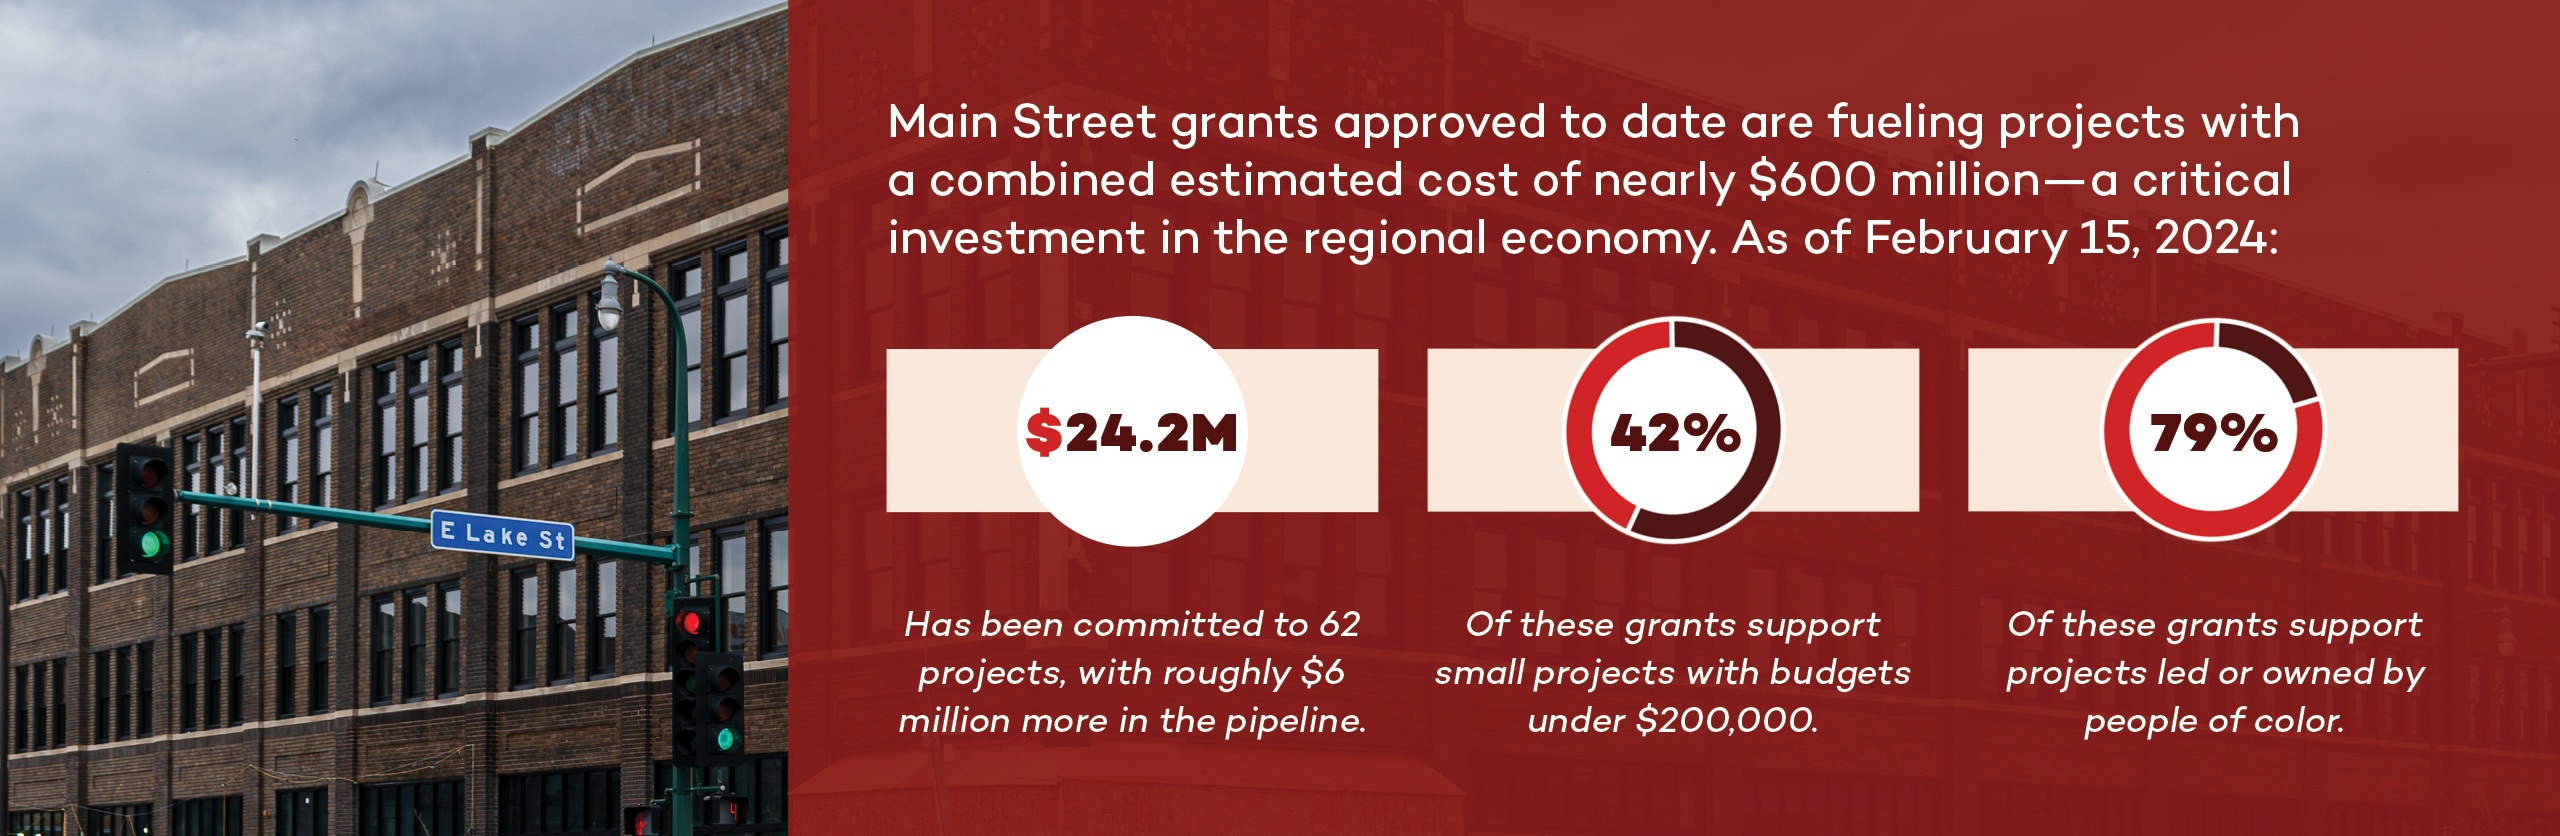 Main Street grants approved to date are fueling projects with a combined estimated cost of around $597—a critical investment in the regional economy. As of February 15th, 2024: $24.2 million has been committed to 62 projects, with roughly $6 million more in the pipeline. 42% of grants awarded to date support small projects with budgets under $200,000. 79% of these grants support projects led or owned by people of color.